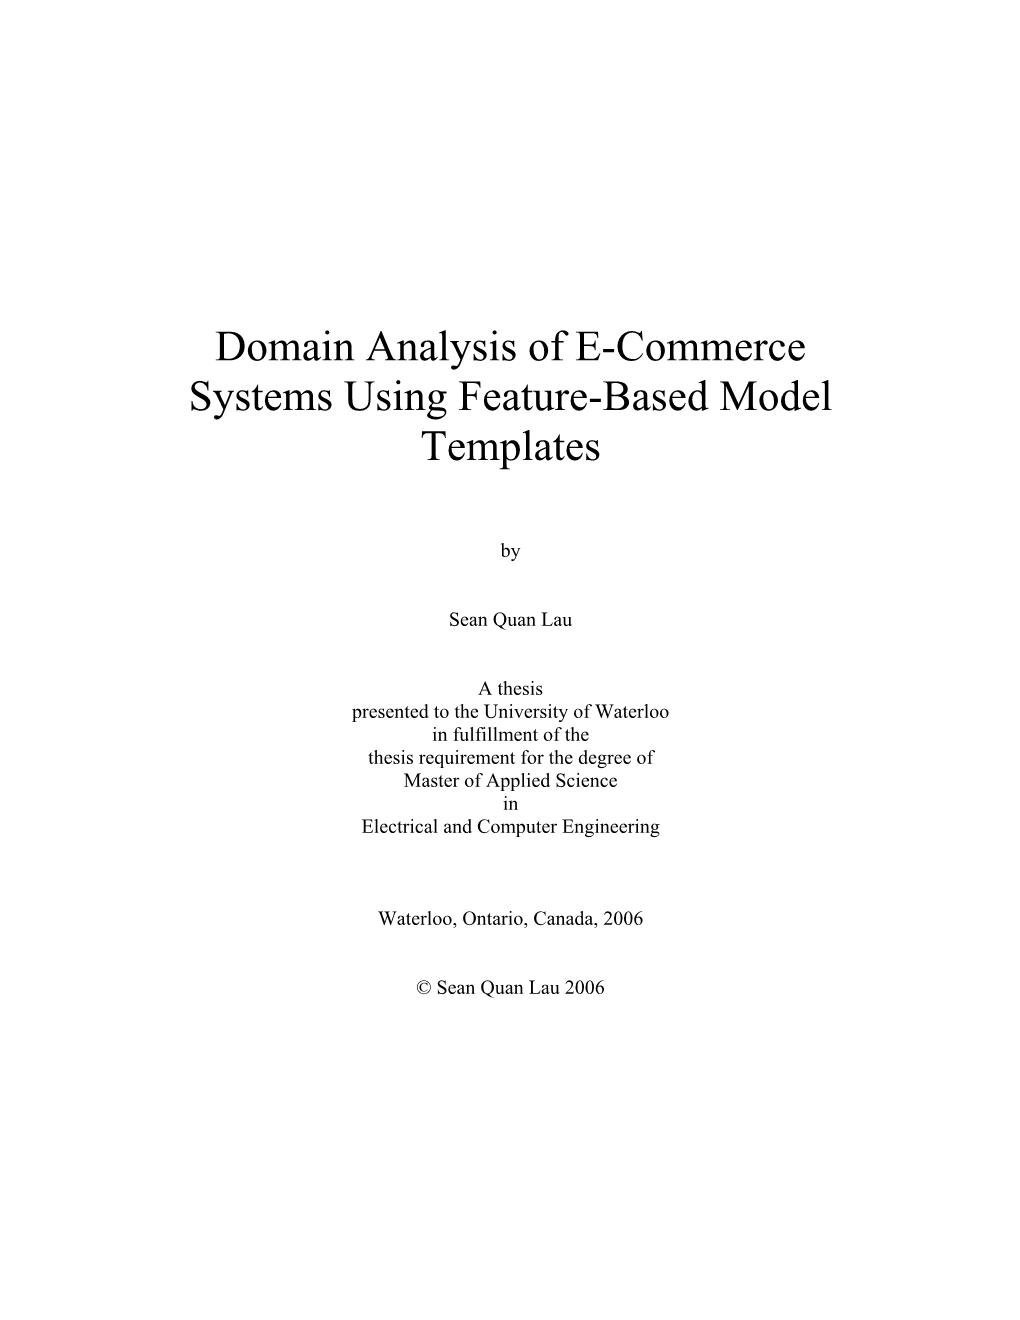 Domain Analysis of E-Commerce Systems Using Feature-Based Model Templates